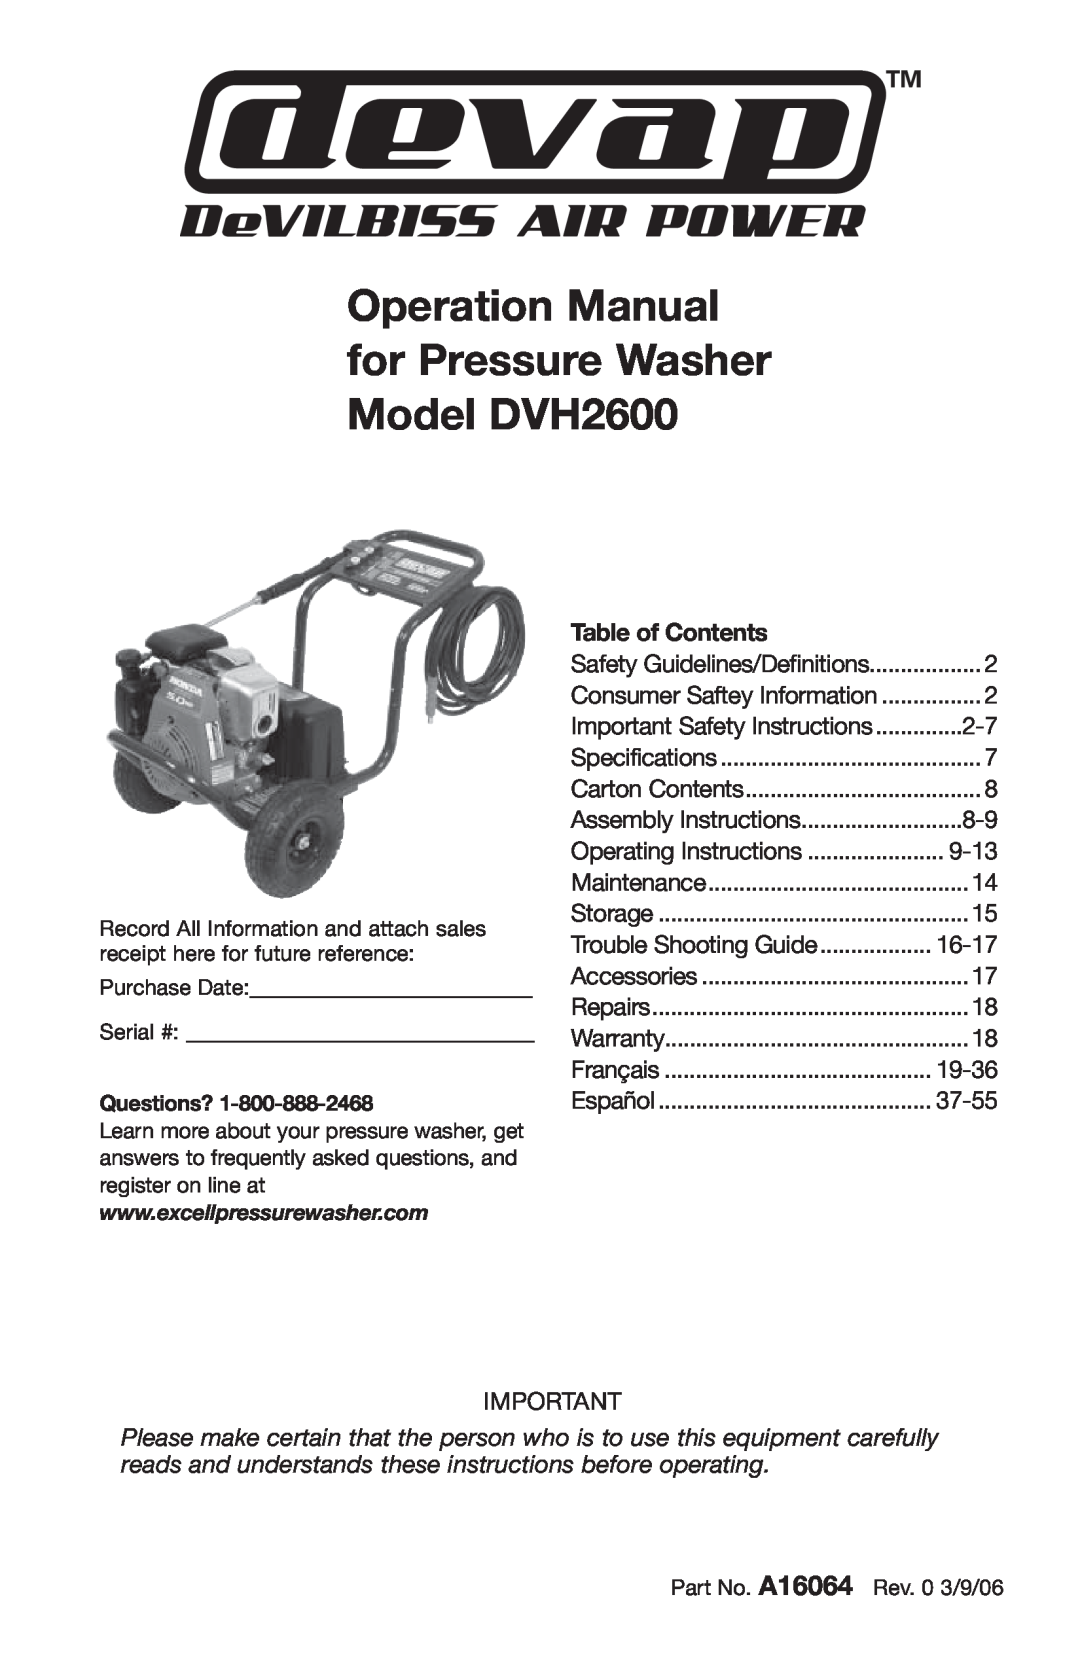 DeVillbiss Air Power Company operation manual Operation Manual for Pressure Washer Model DVH2600, Table of Contents 